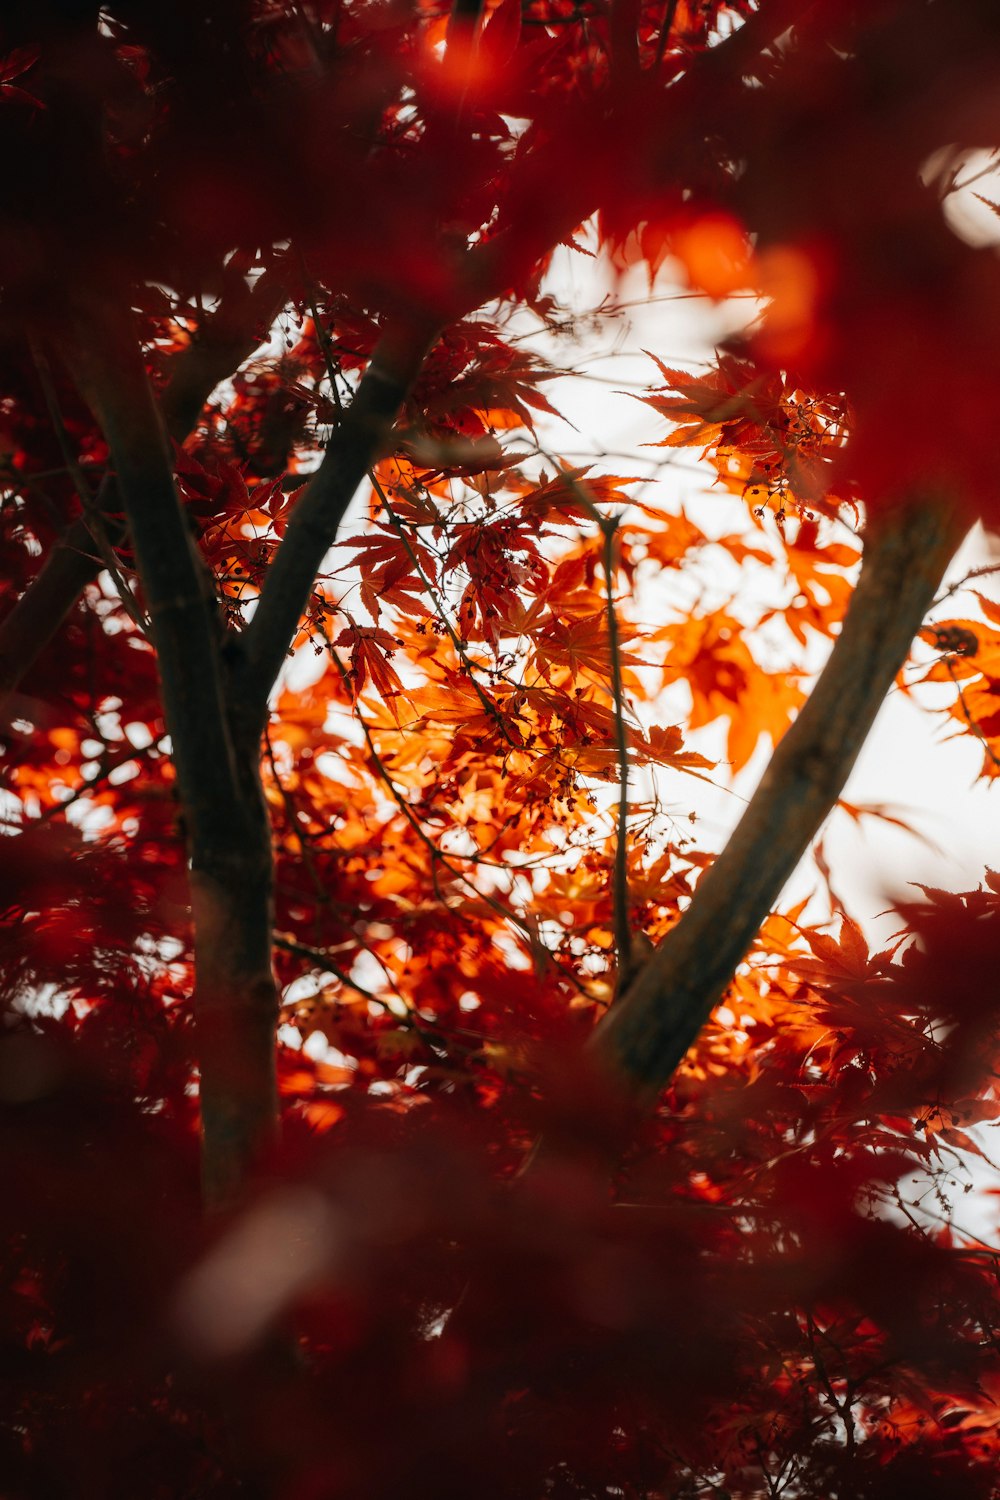 a tree with red leaves is shown through the branches